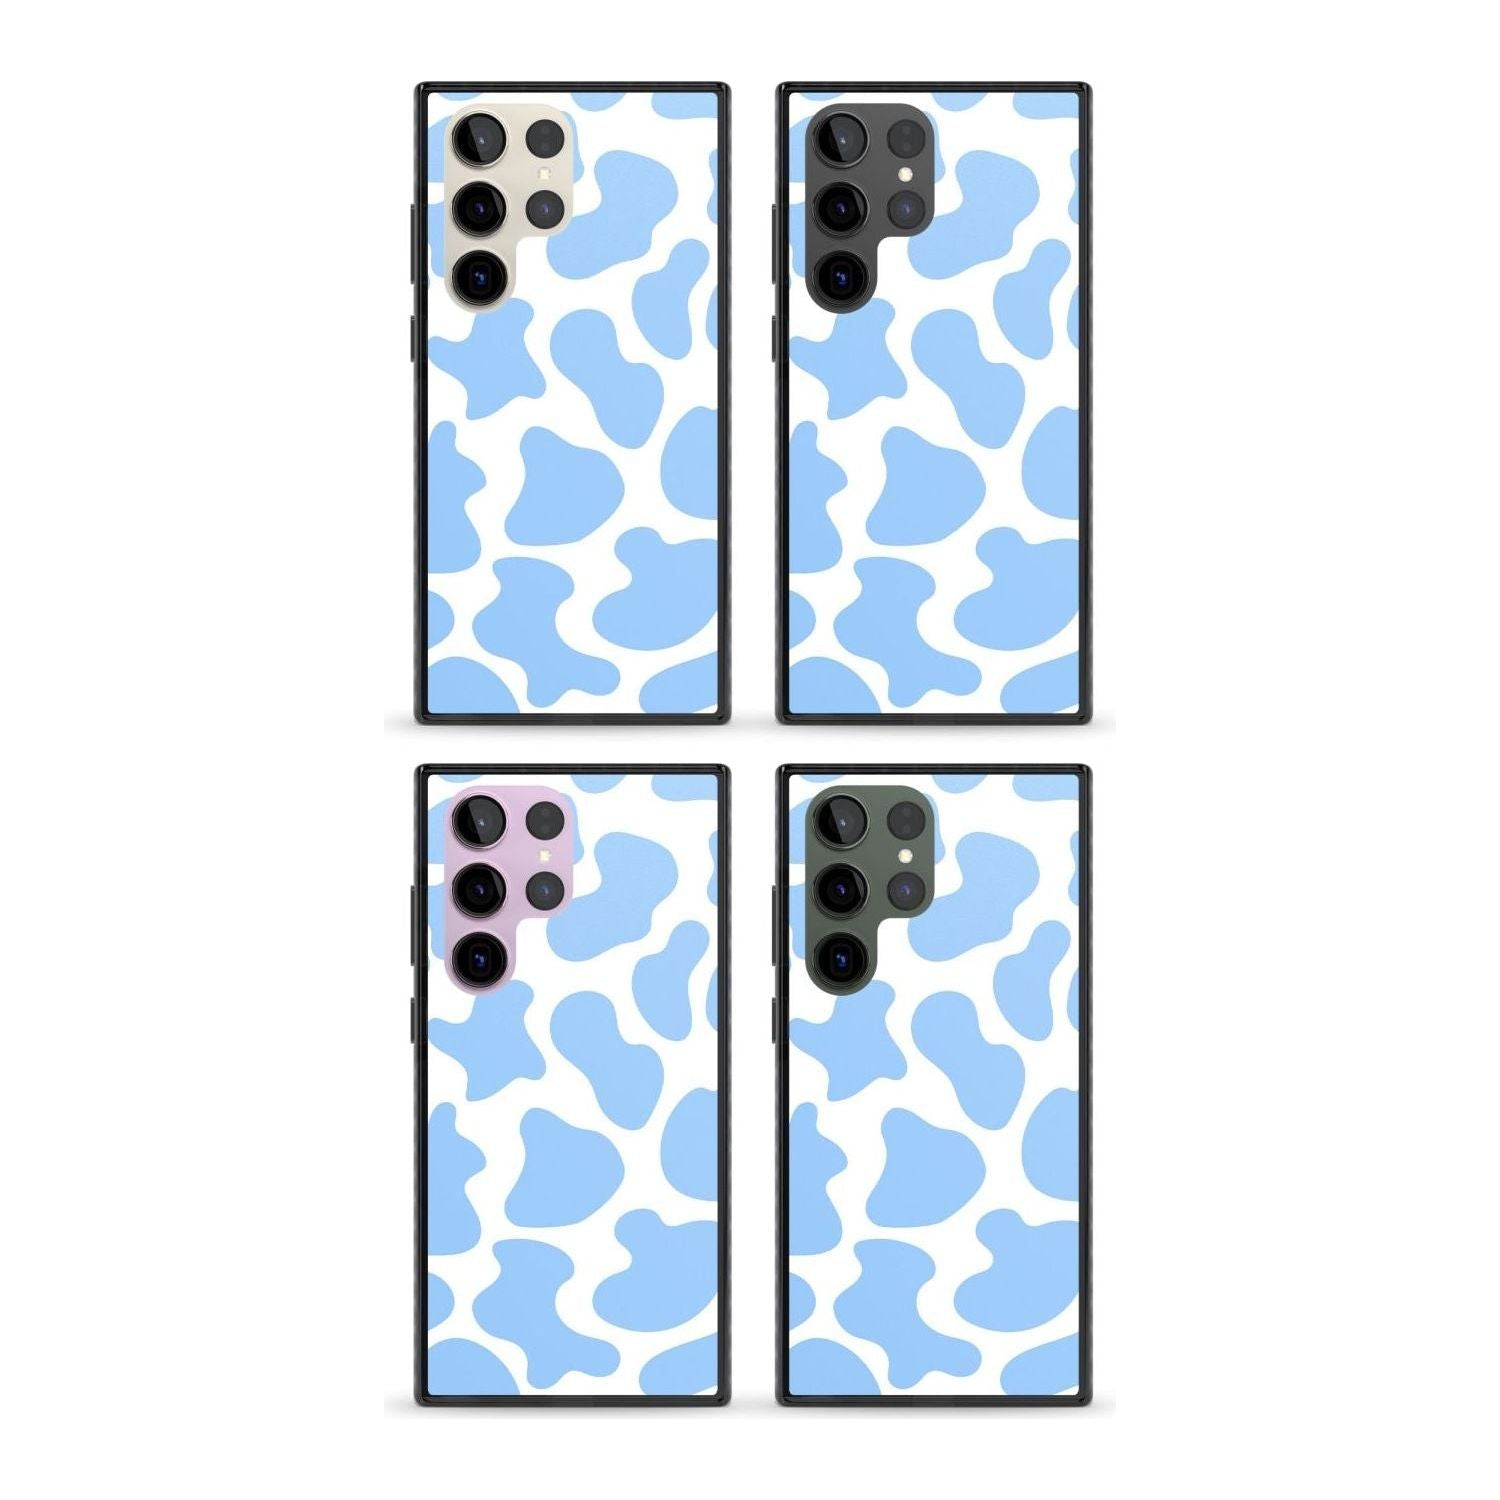 Blue and White Cow Print Phone Case iPhone 15 Pro Max / Black Impact Case,iPhone 15 Plus / Black Impact Case,iPhone 15 Pro / Black Impact Case,iPhone 15 / Black Impact Case,iPhone 15 Pro Max / Impact Case,iPhone 15 Plus / Impact Case,iPhone 15 Pro / Impact Case,iPhone 15 / Impact Case,iPhone 15 Pro Max / Magsafe Black Impact Case,iPhone 15 Plus / Magsafe Black Impact Case,iPhone 15 Pro / Magsafe Black Impact Case,iPhone 15 / Magsafe Black Impact Case,iPhone 14 Pro Max / Black Impact Case,iPhone 14 Plus / Bl